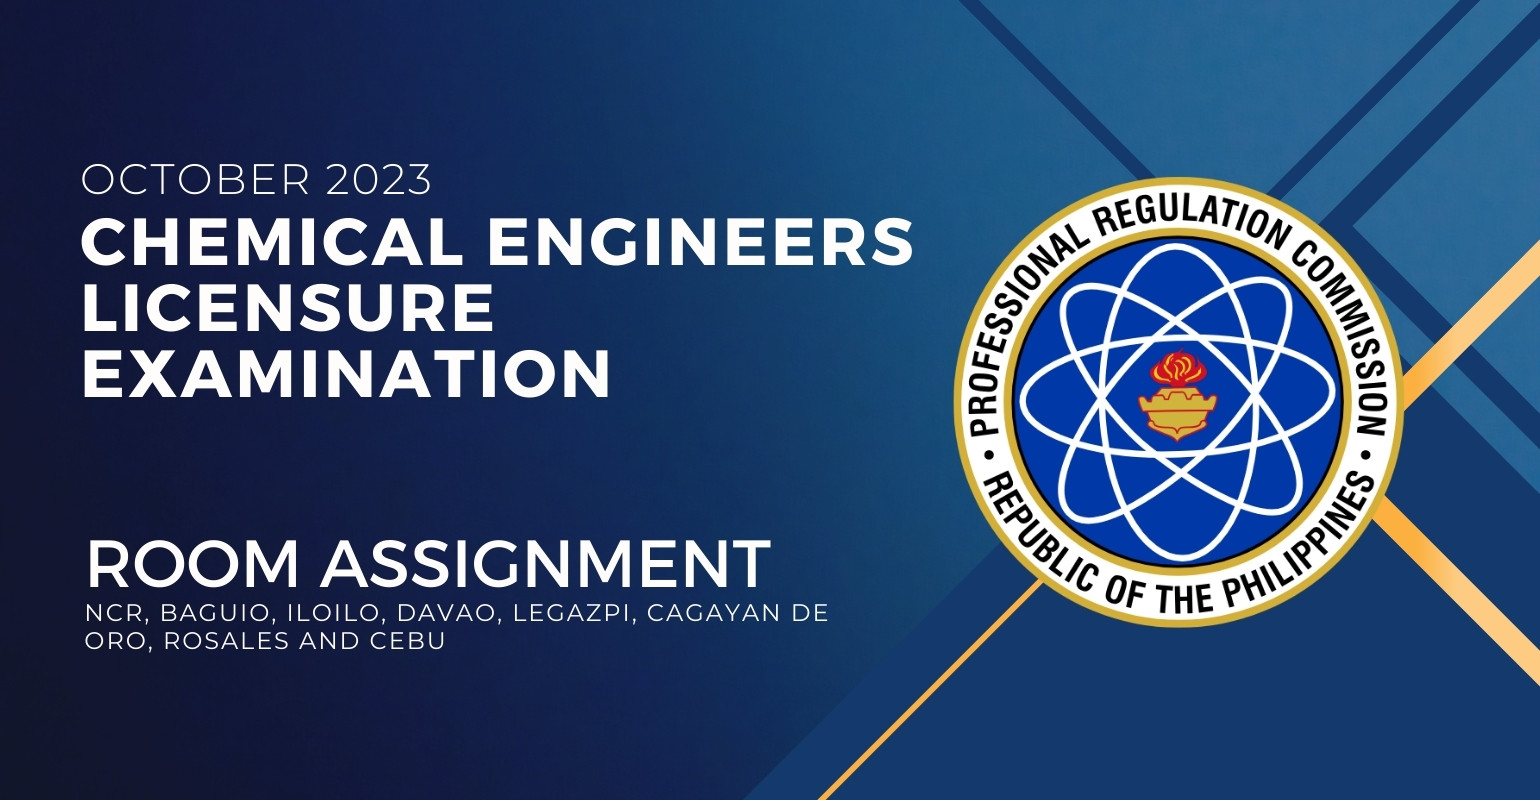 room assignment october 2023 chemical engineers licensure exam